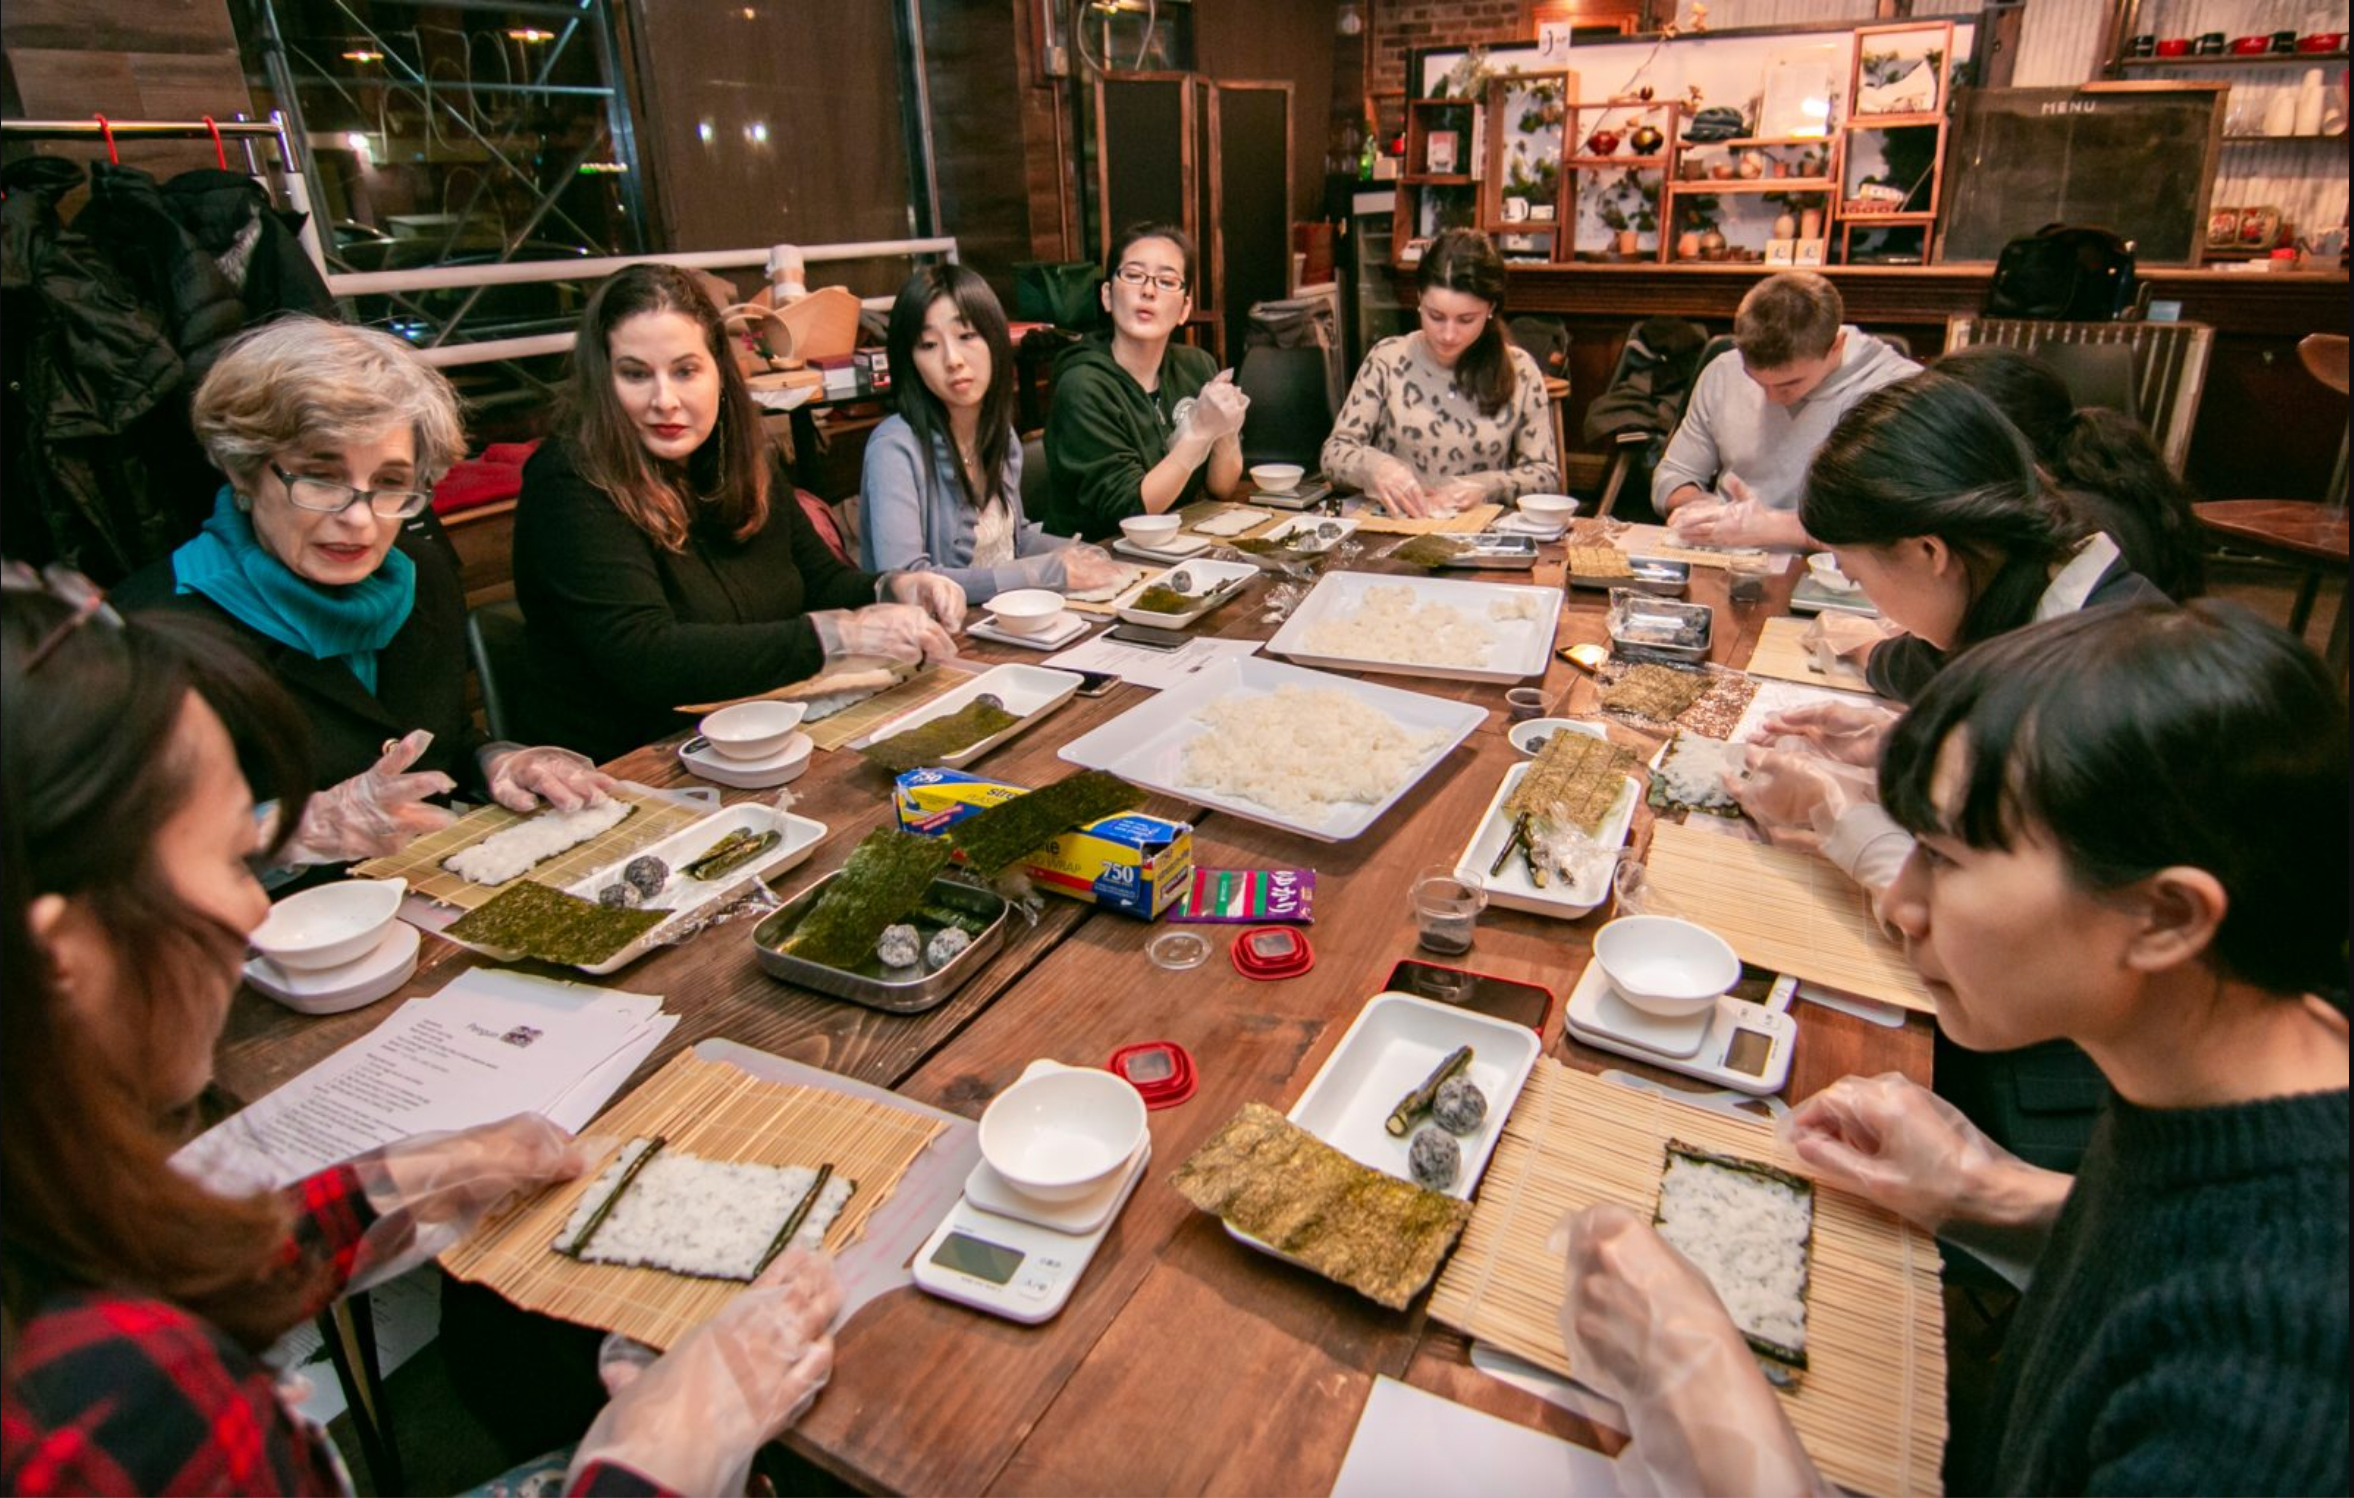 A lively culinary team-building event with a diverse group of participants engaged in a sushi-making workshop.